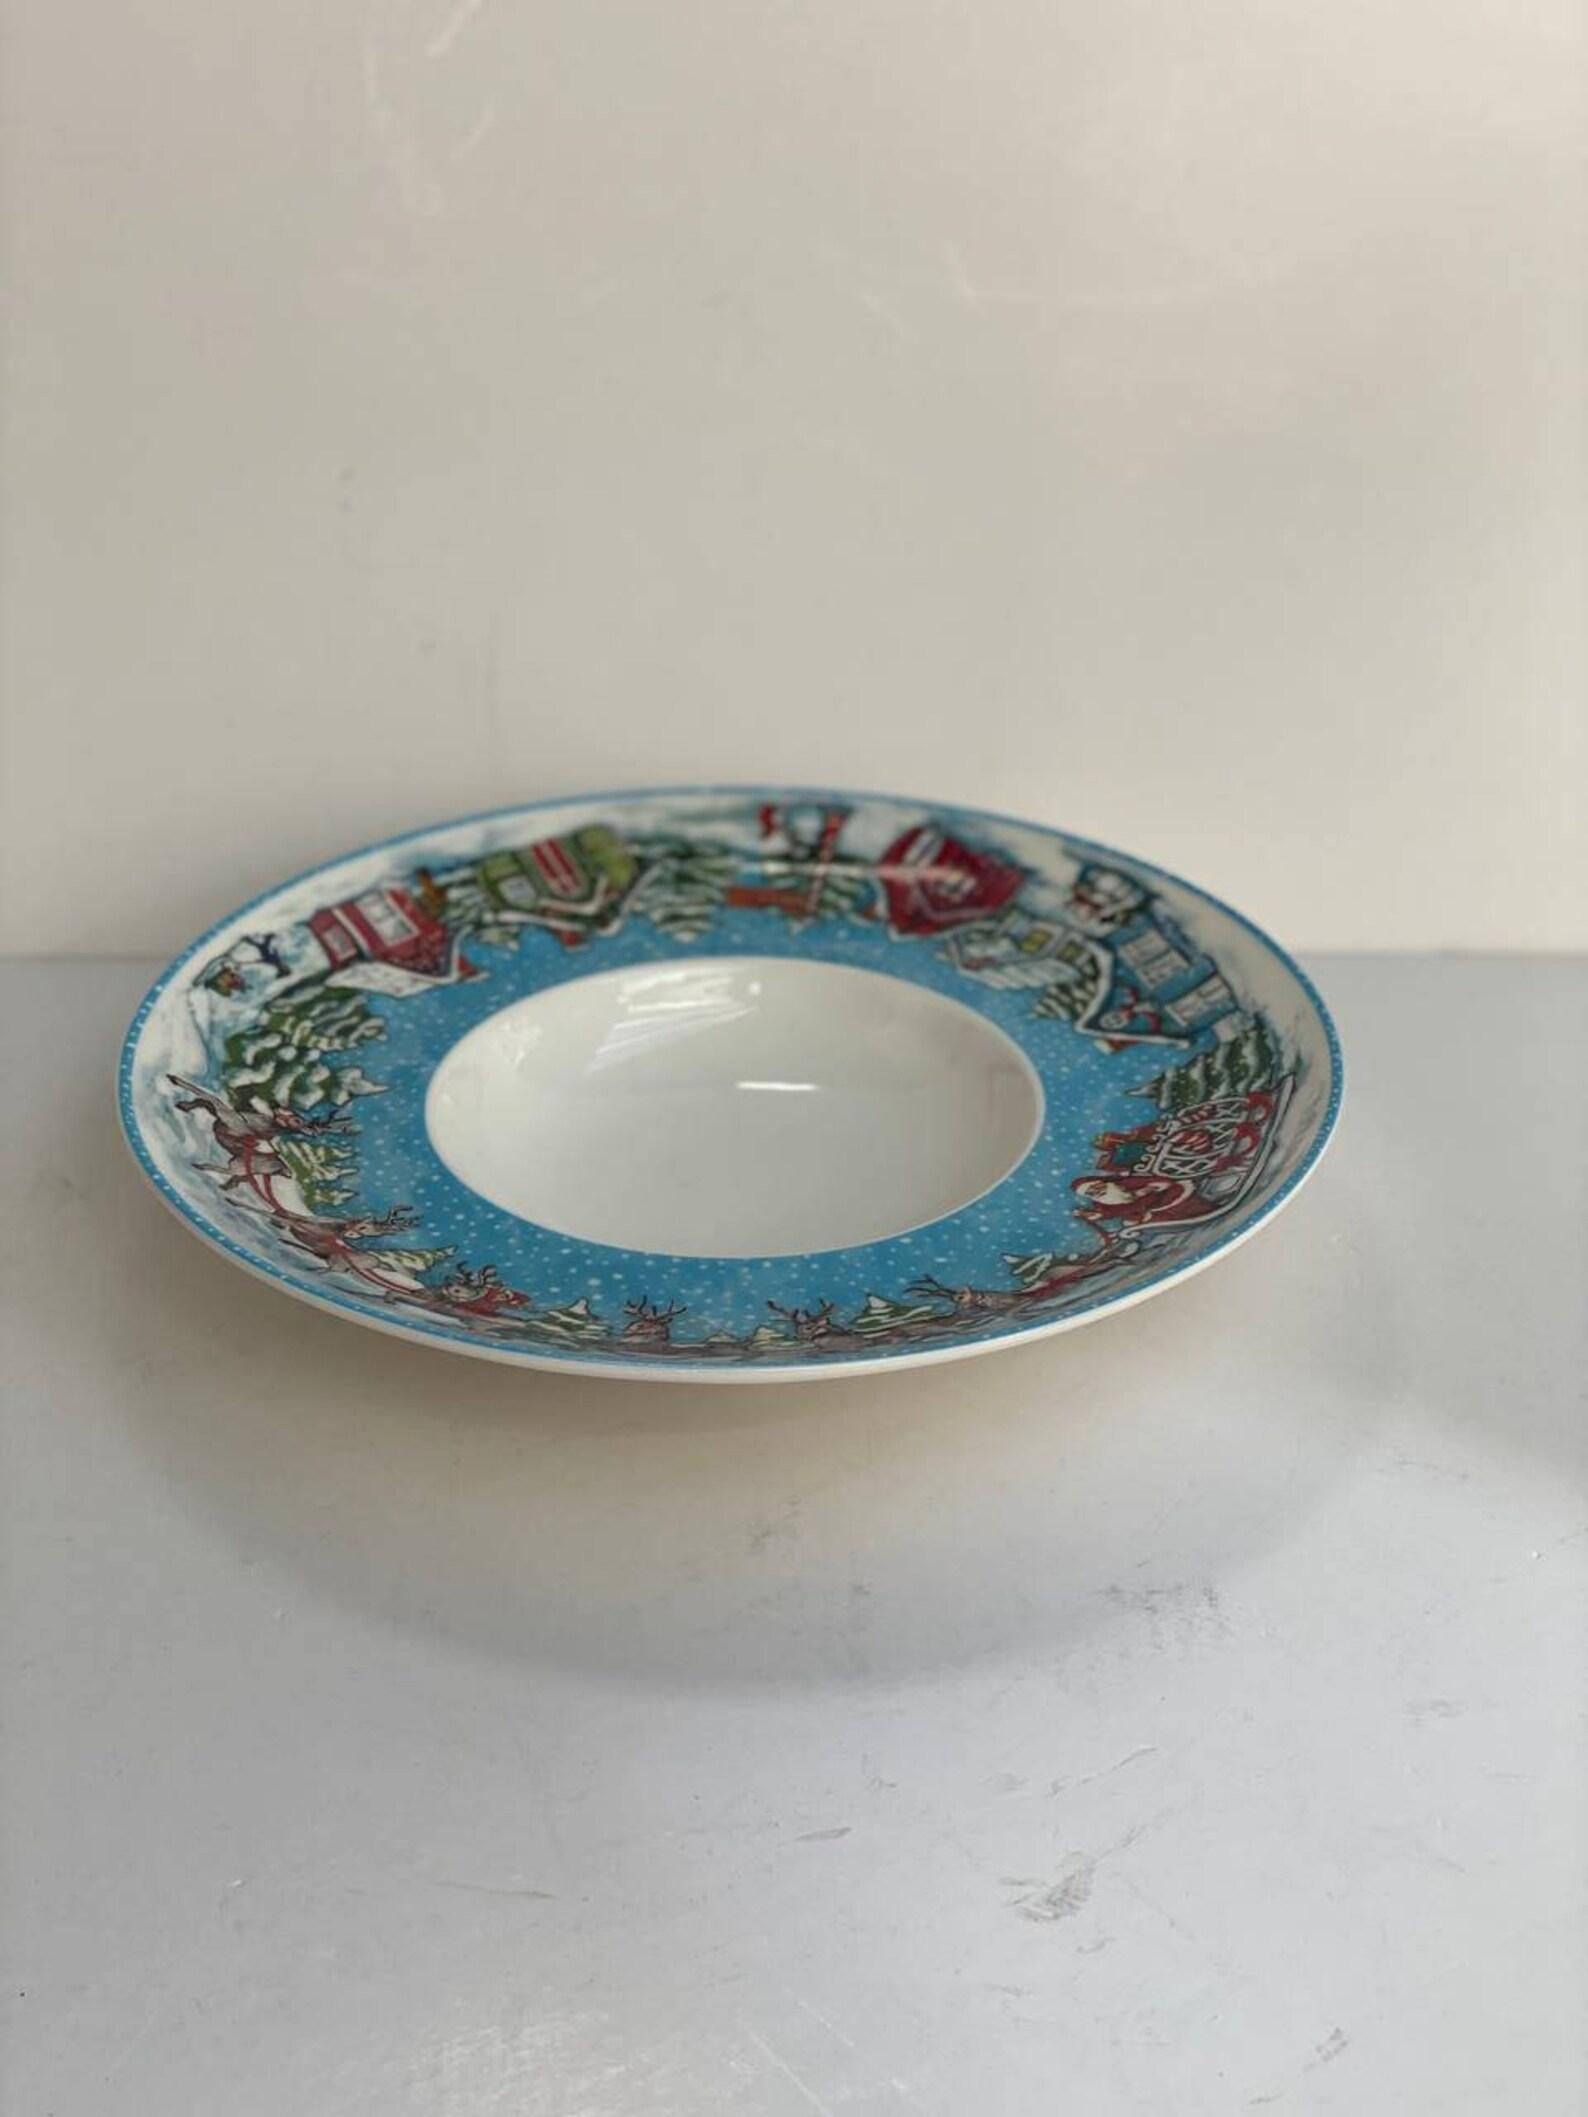 Beautiful Christmas Plate From Villeroy & Boch. 

Premium Porcelain. 

Limited edition. 

 The Winter Christmas collection includes, among other things, a functional bowl for serving. 

The collection created for winter, Christmas meetings